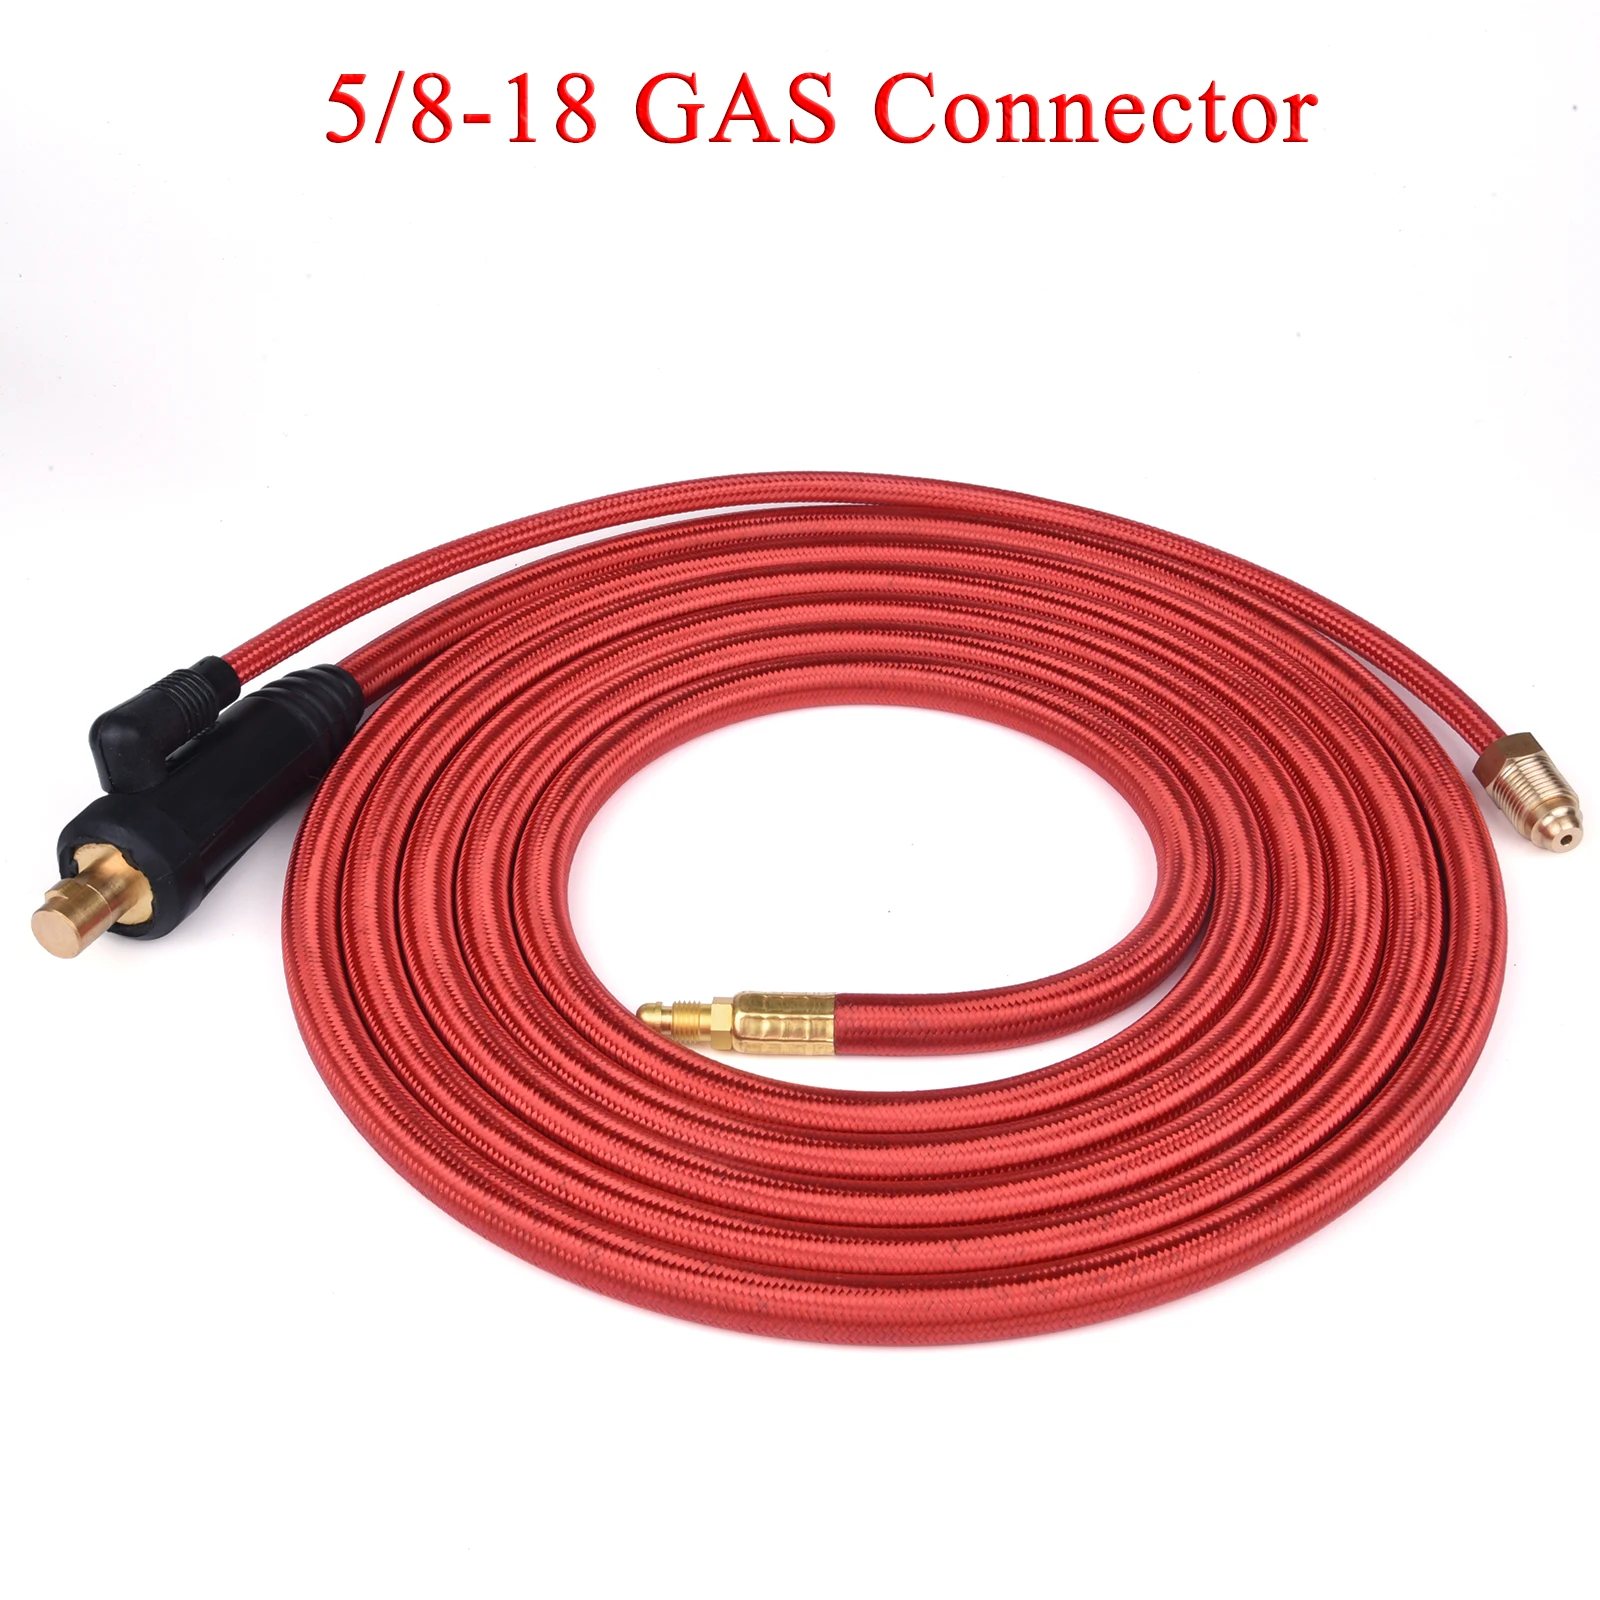 3.8m/7.6m WP9 WP17 TIG Welding Torch Gas-Electric Integrated Red Hose Cable Wires 5/8 Quick Connector 35-50 Euro Connector images - 6